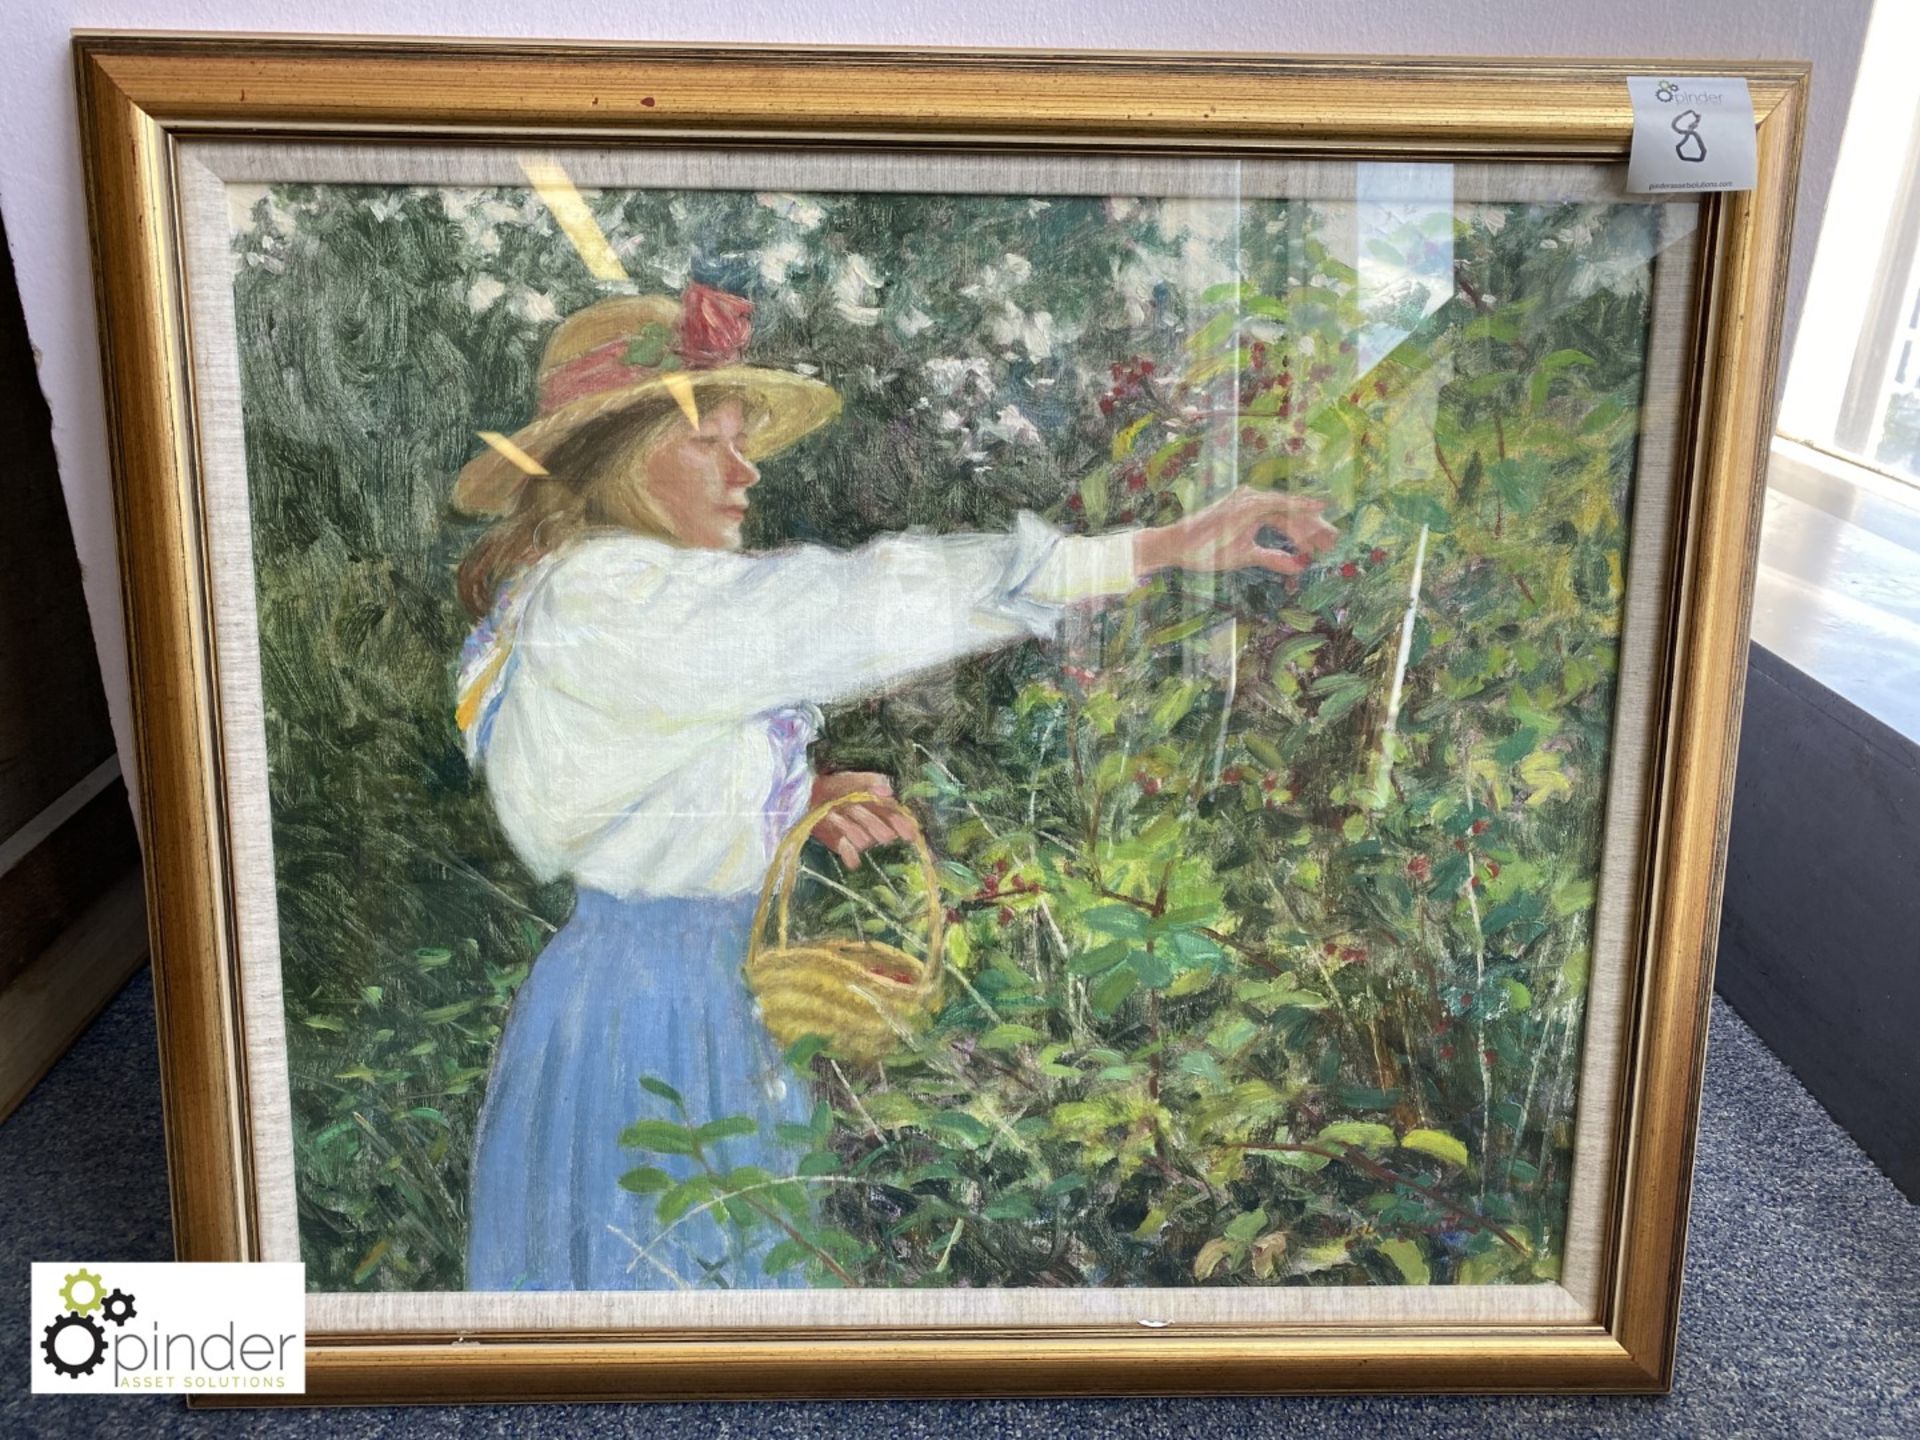 Framed and glazed Oil on Linen “Picking Berries”, by Douglas Smith, 715mm x 620mm - Image 2 of 3